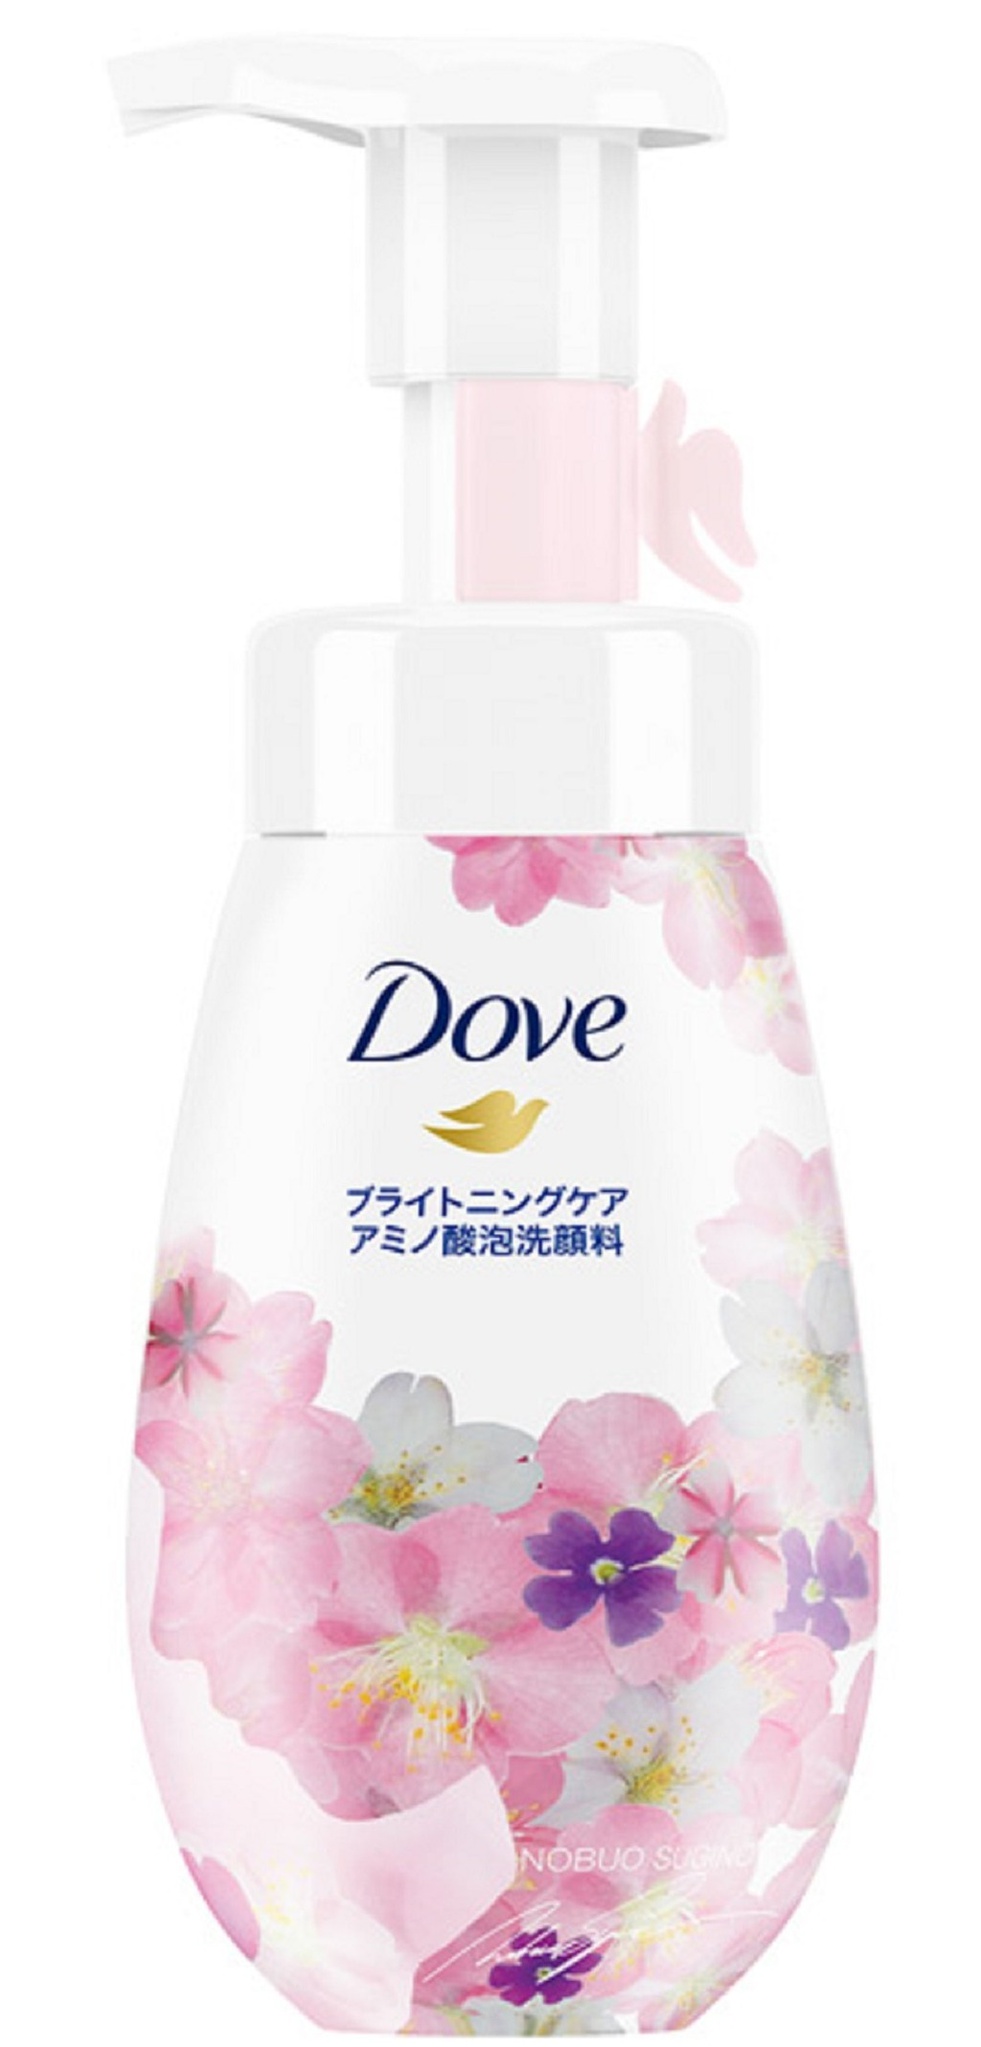 Dove Amino Acid Facial Cleansing Mousse Brightening Care